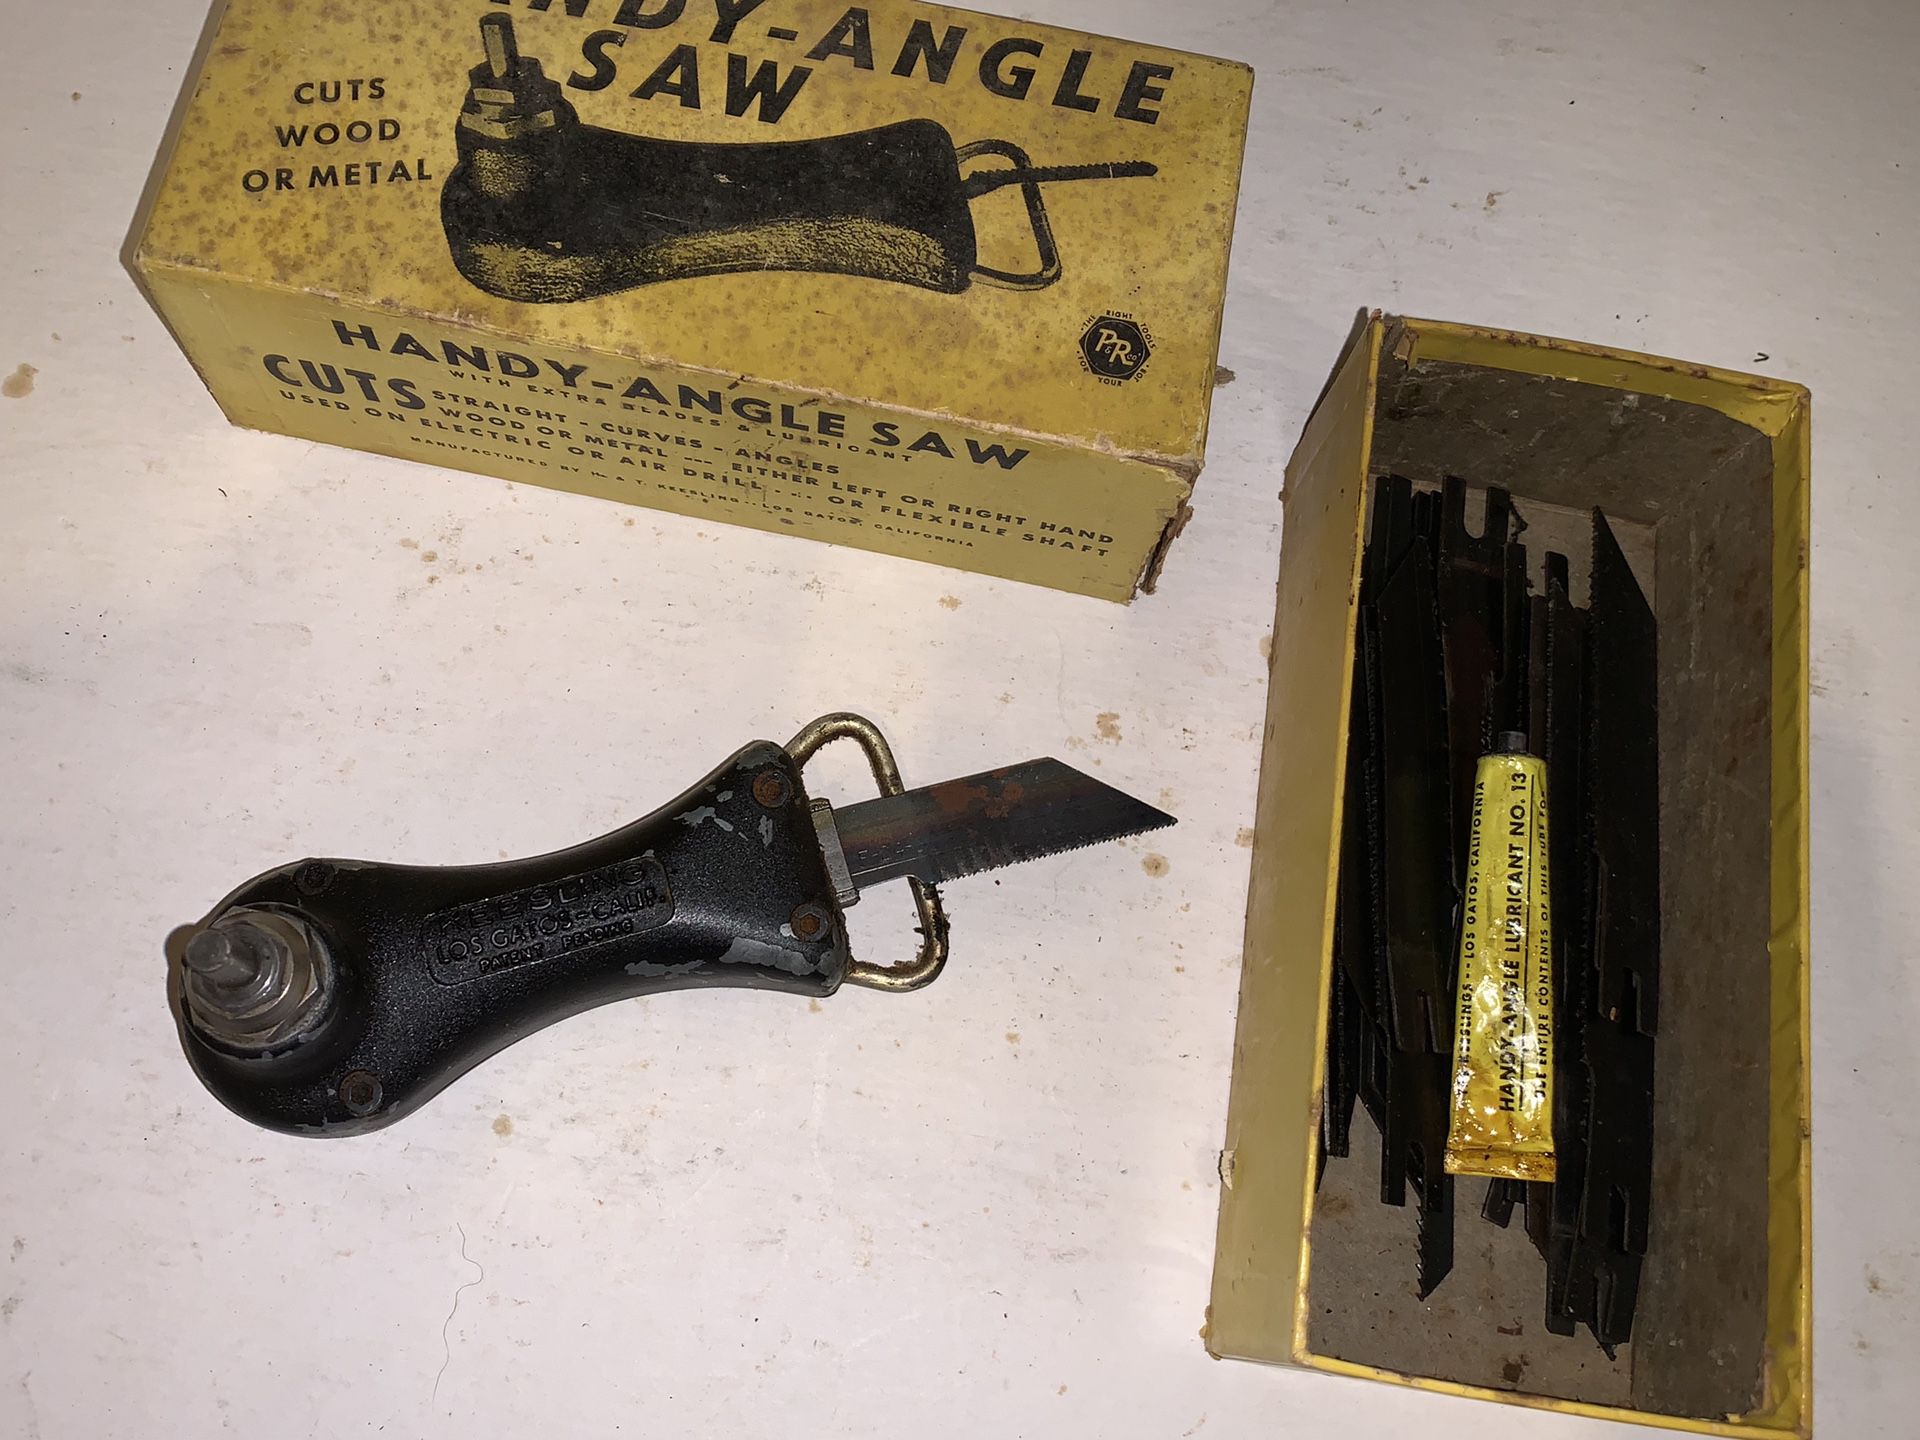 Vintage Keesling Attachment for Drill Handy Angle saw W Box Blades RARE